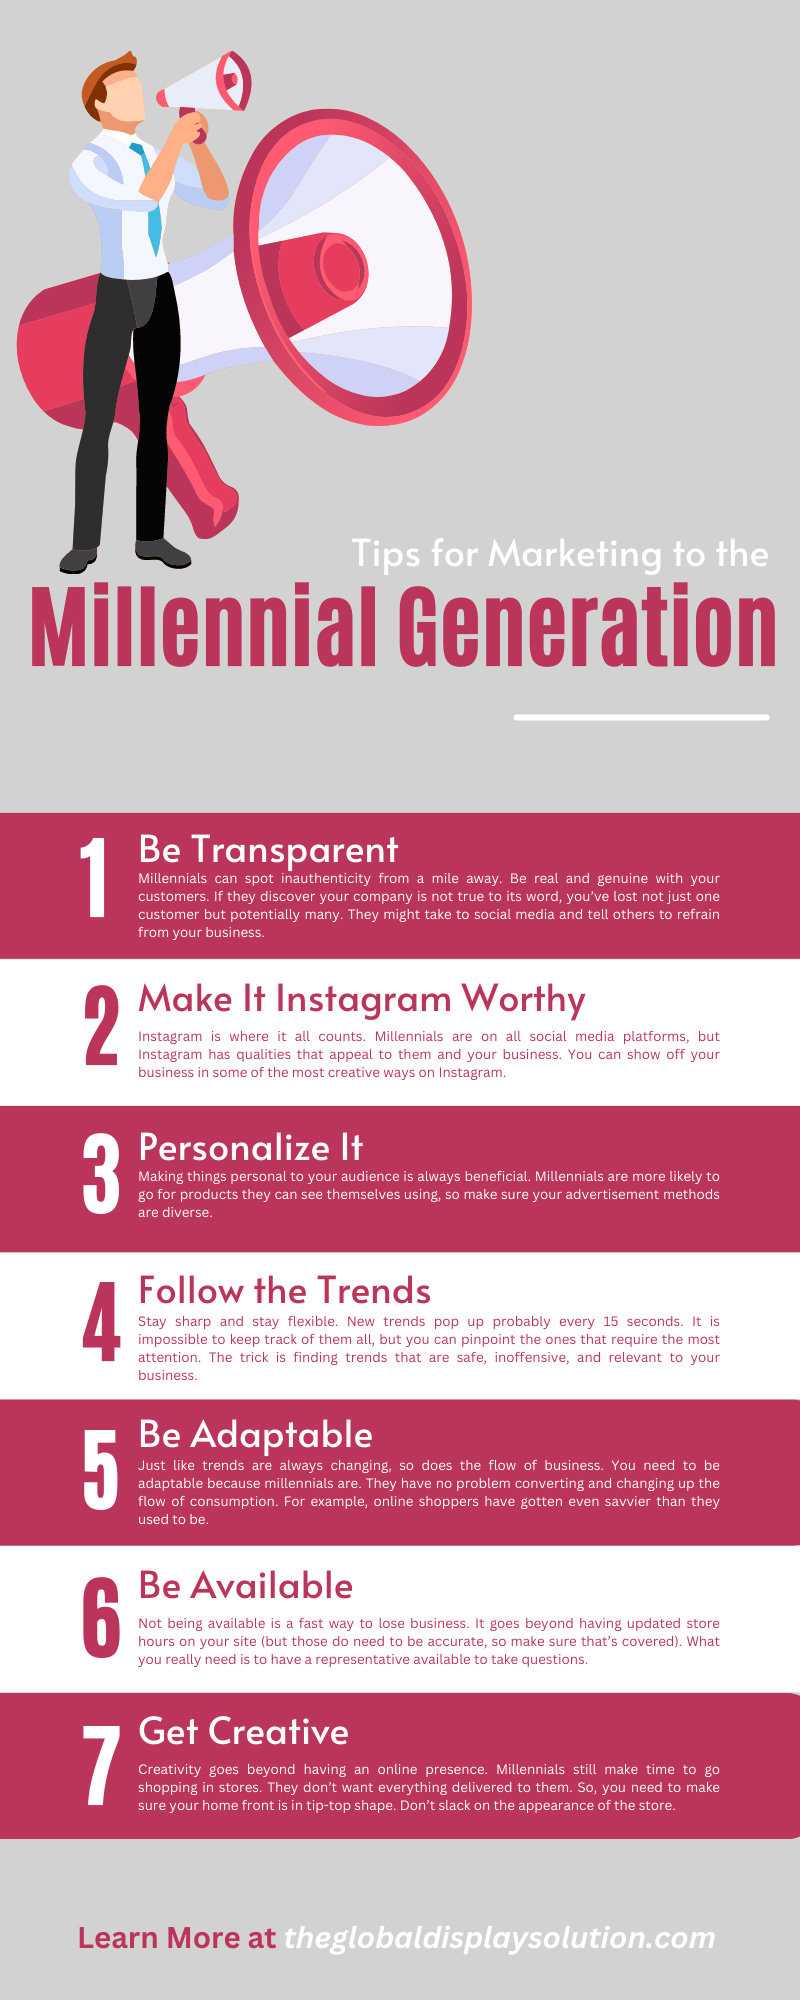 10 Tips for Marketing to the Millennial Generation